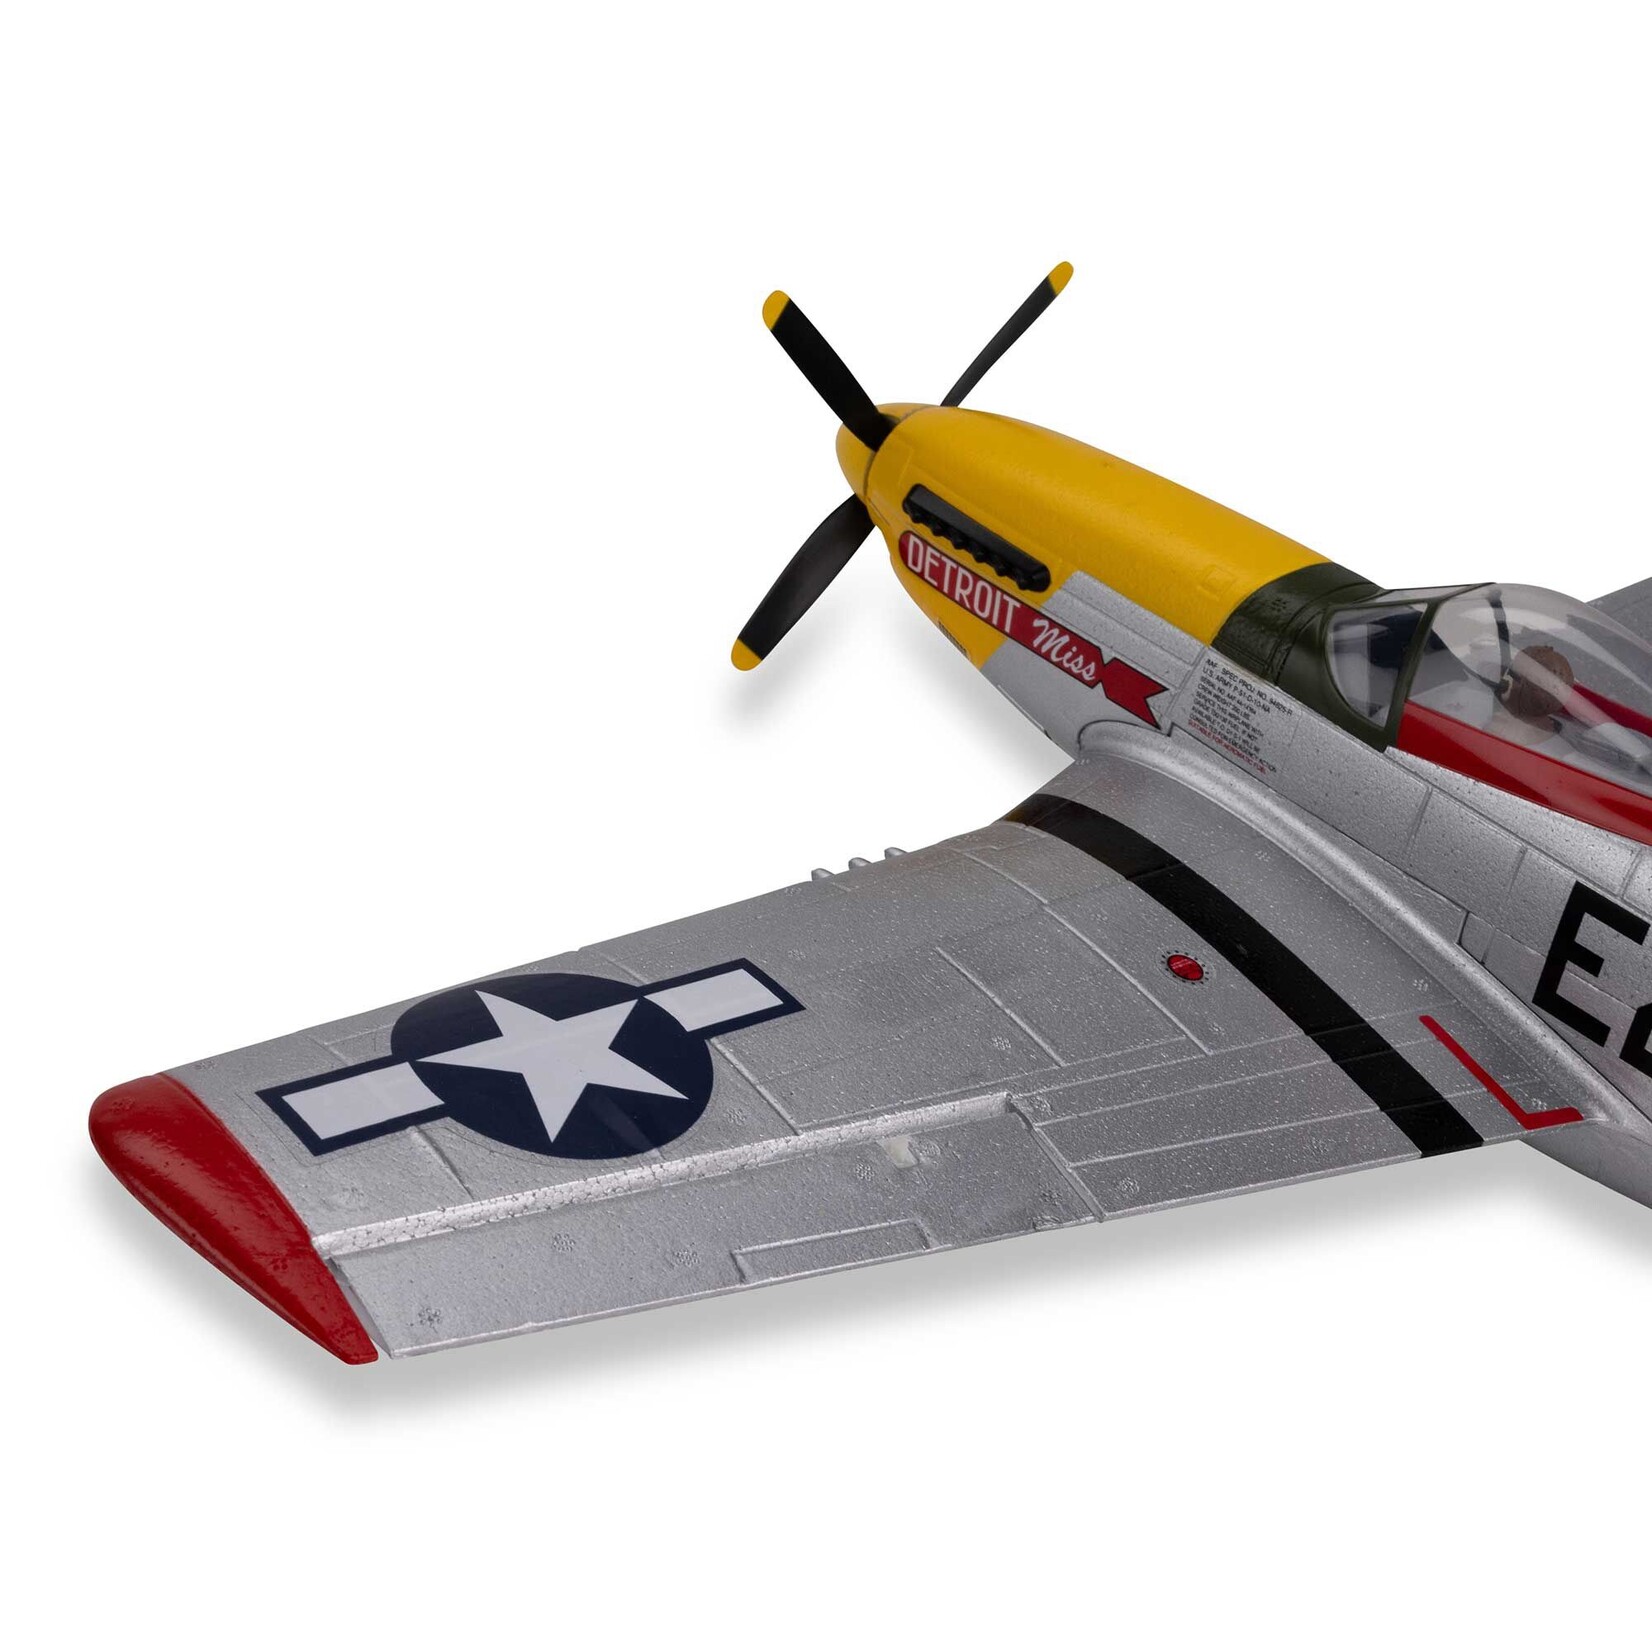 E-Flite UMX P-51D Mustang “Detroit Miss” BNF Basic with AS3X and SAFE Select